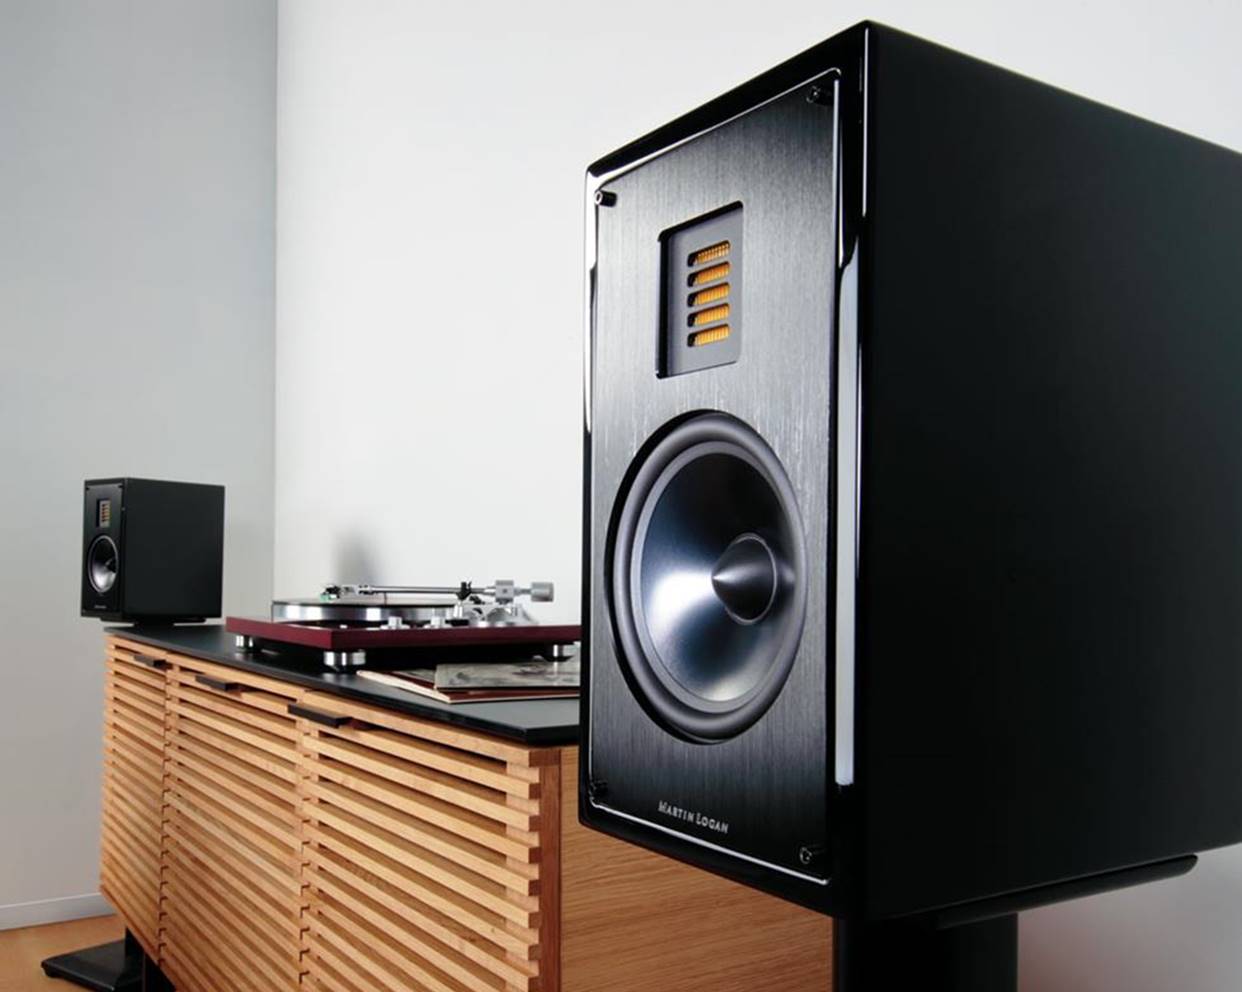 scherp dier Shilling The 10 Best Speakers in the world right now - Bass Head Speakers